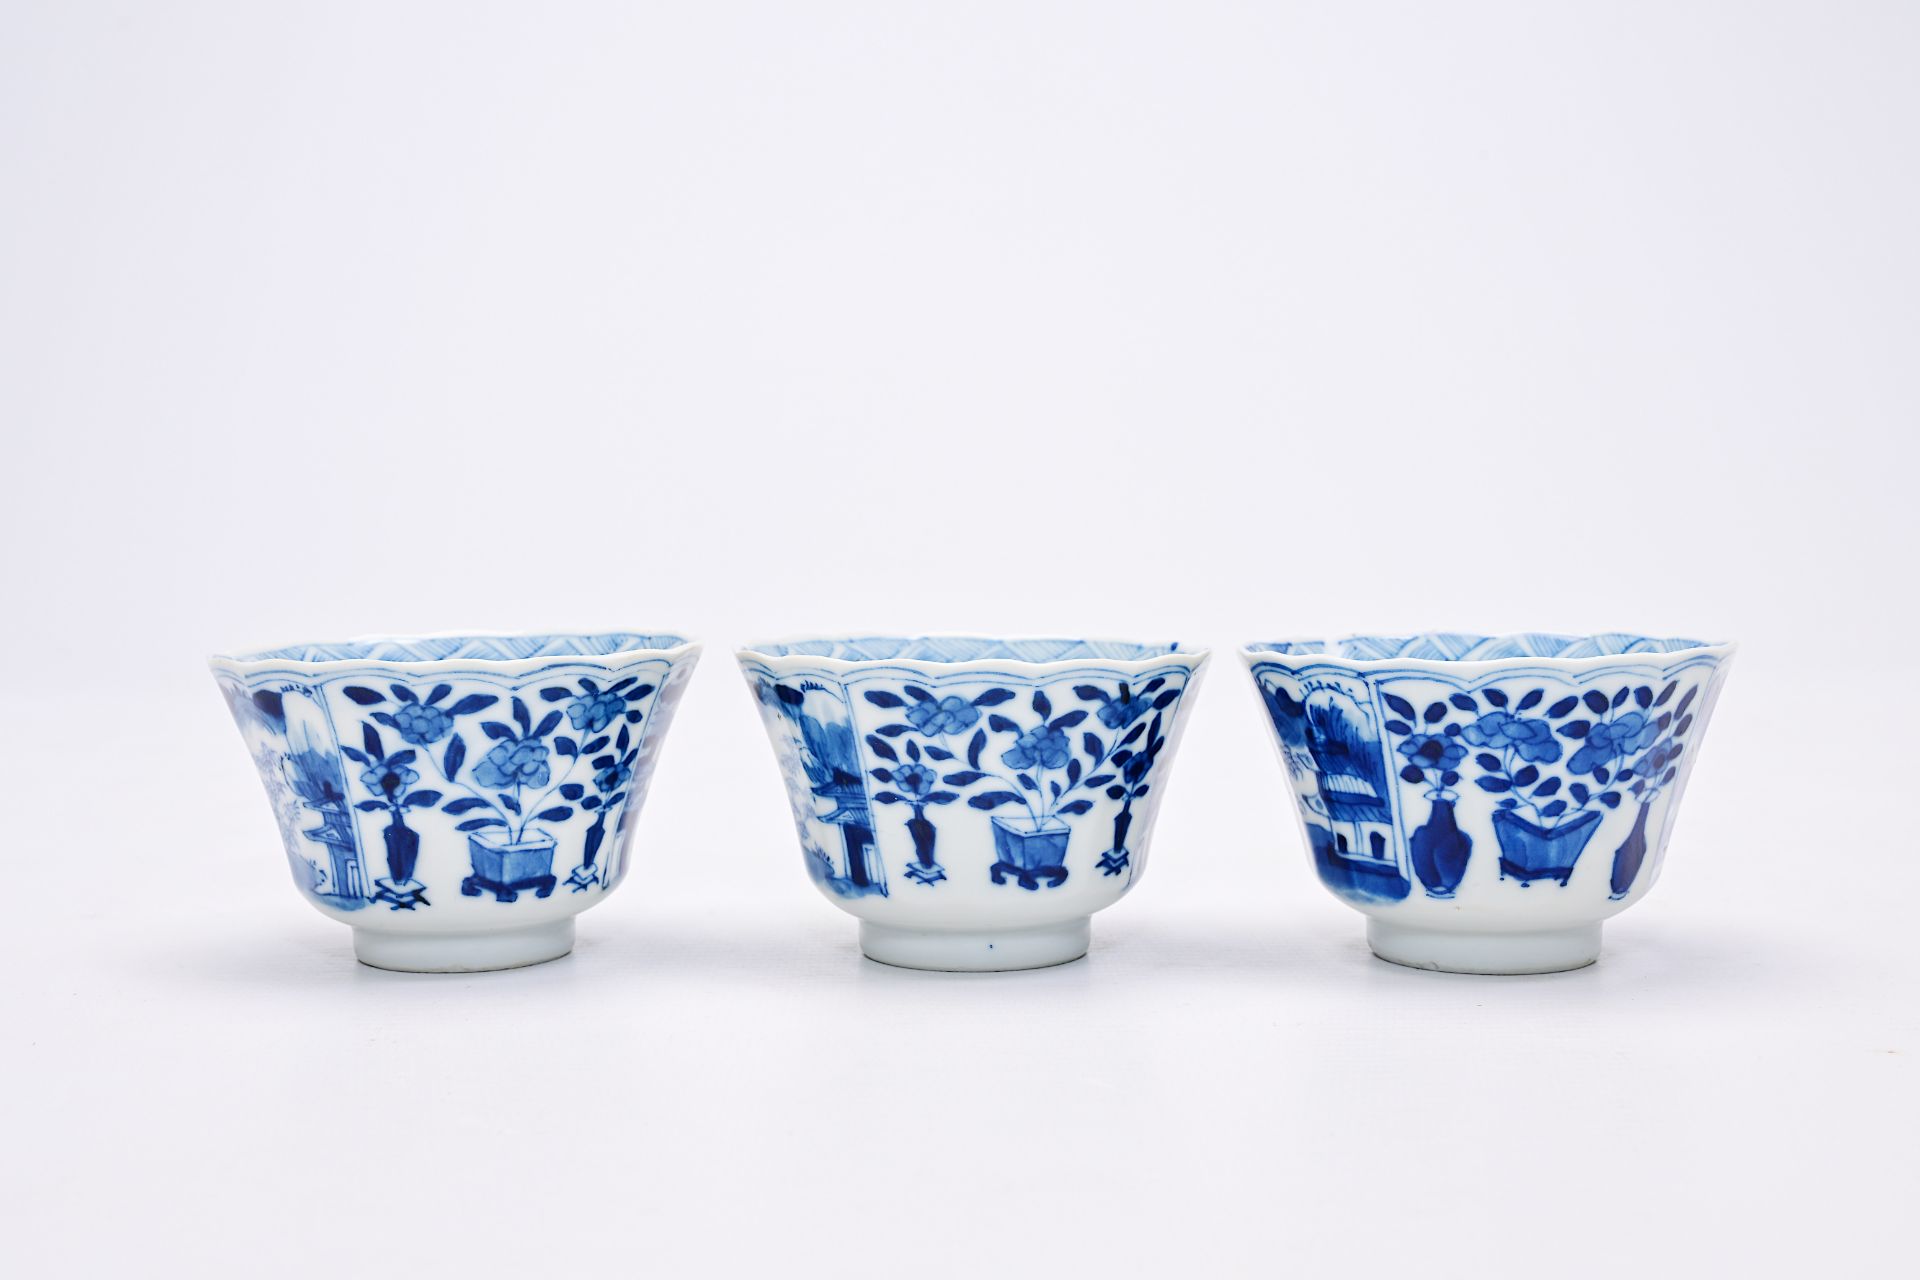 A varied collection of Chinese blue and white porcelain with floral design and figures in a landscap - Image 13 of 22